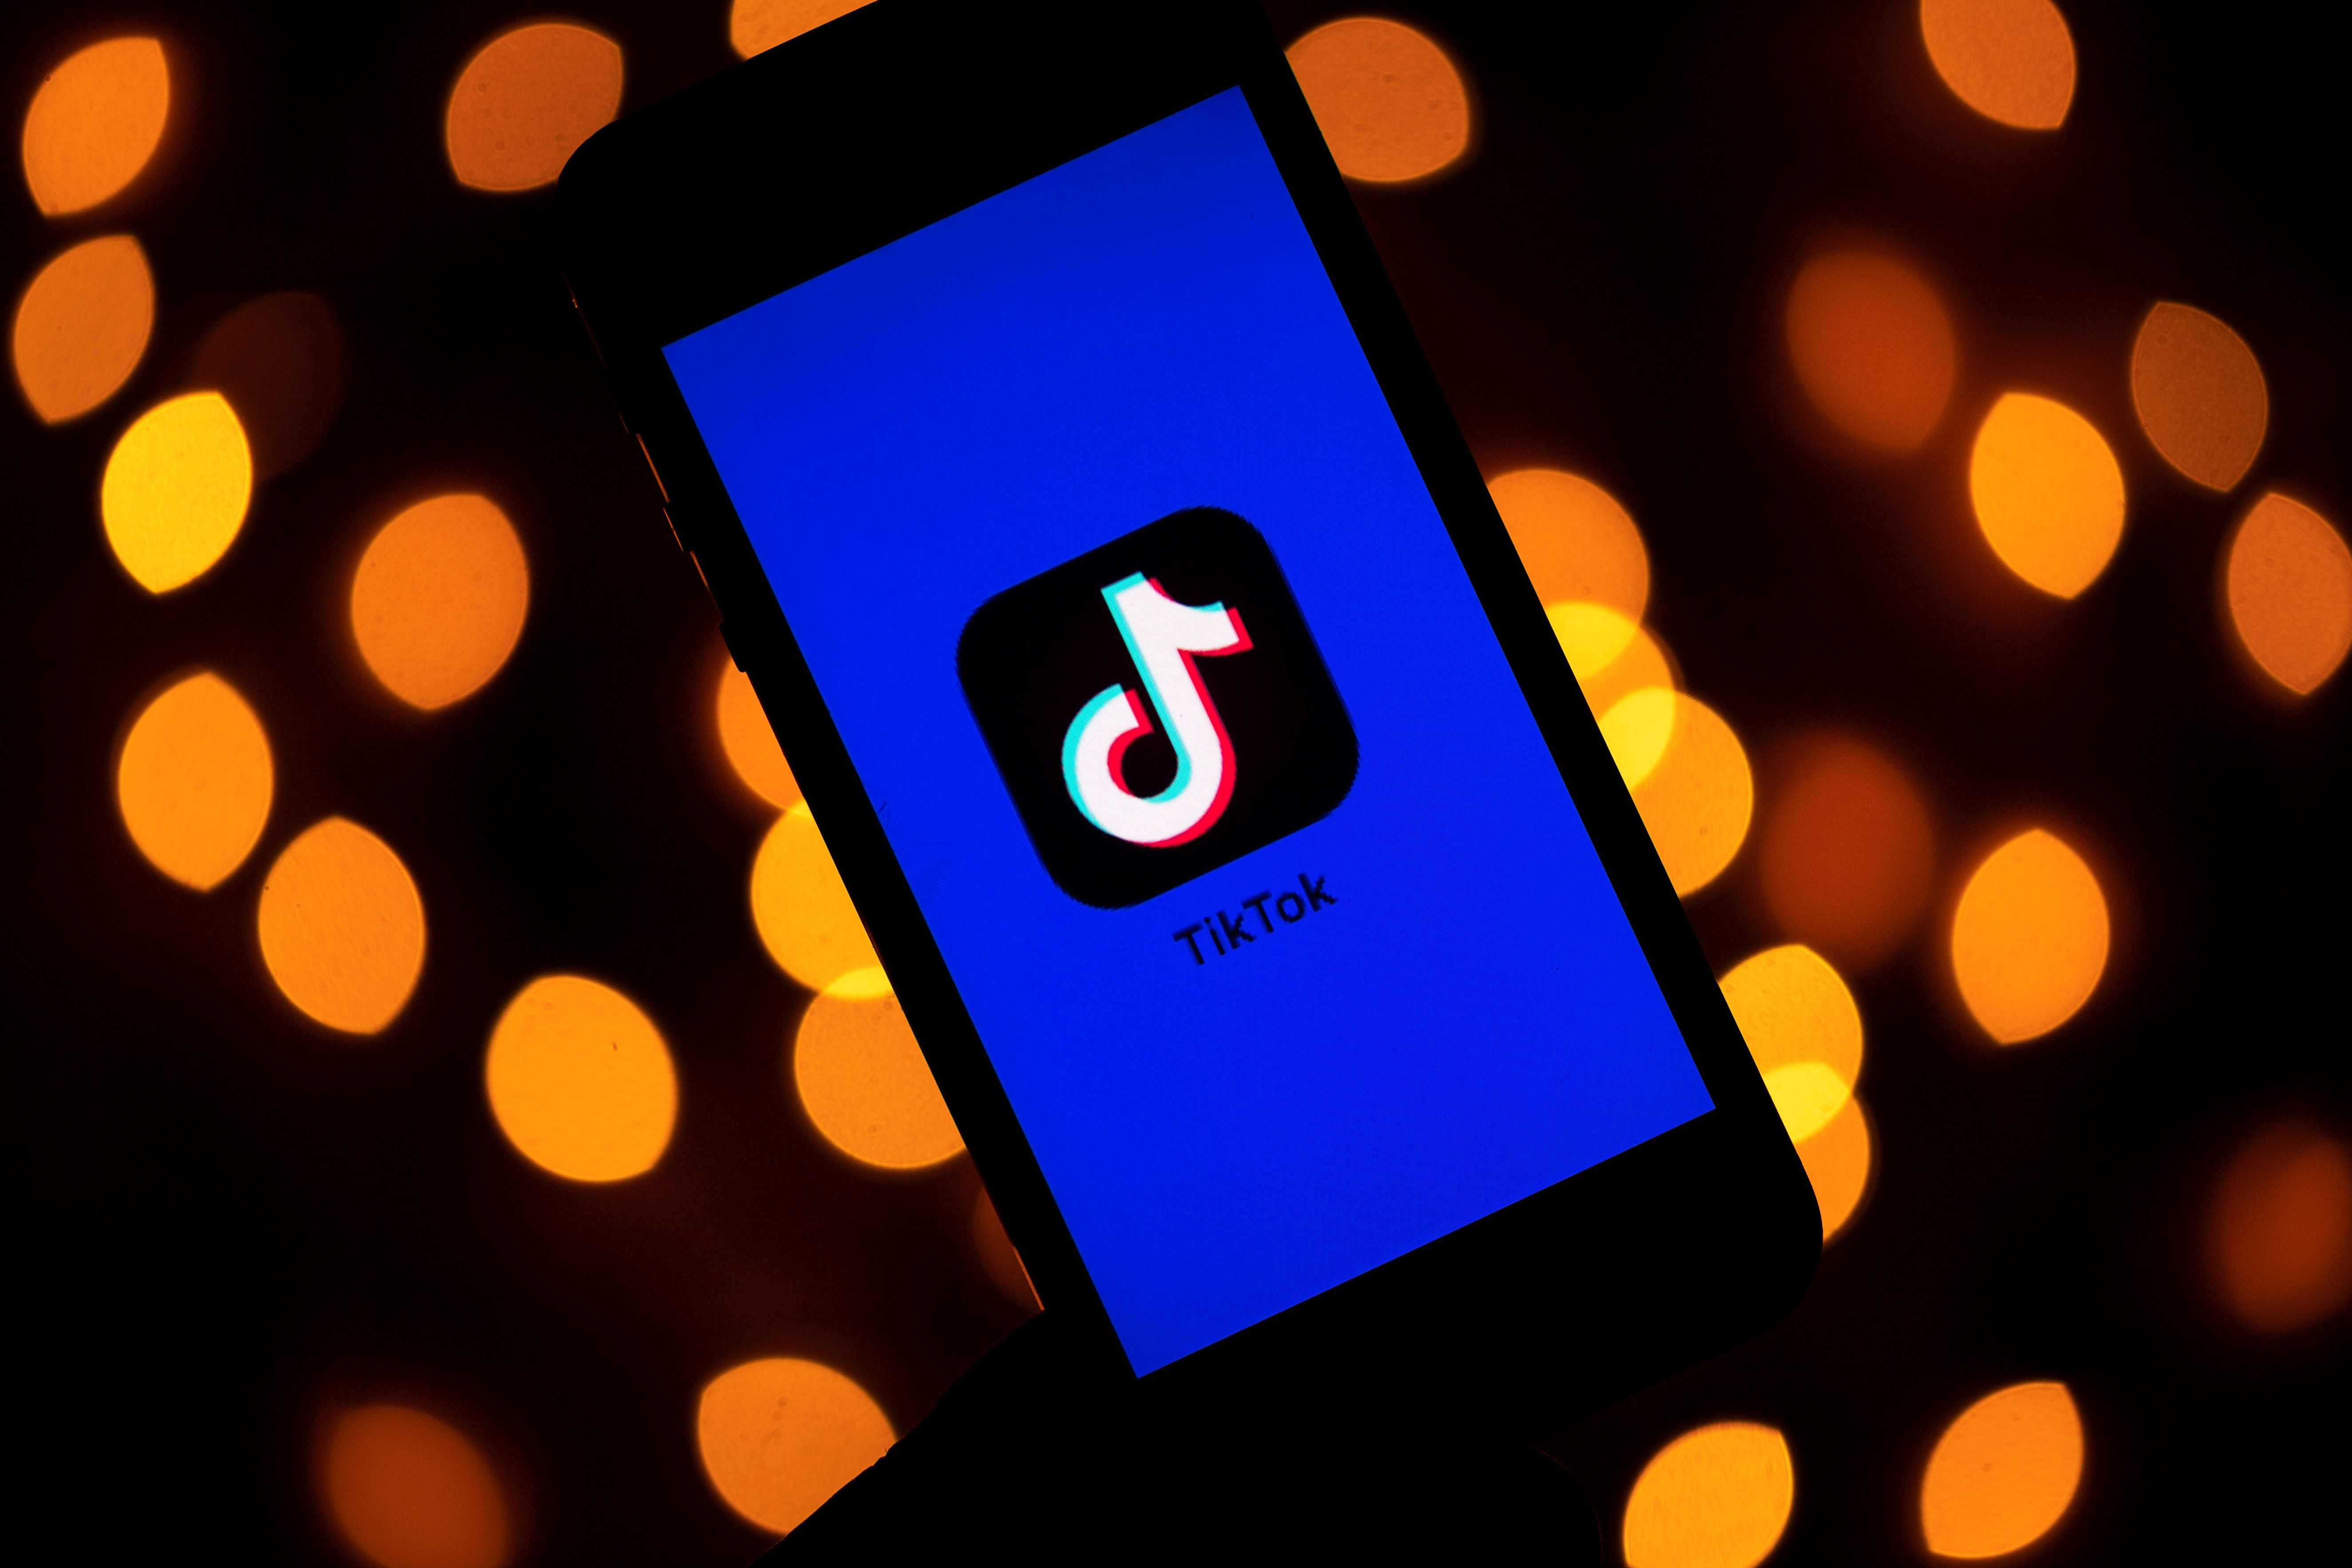 Outlawing TikTok would eliminate&nbsp;one of the&nbsp;fastest-growing social-media platforms in the U.S.